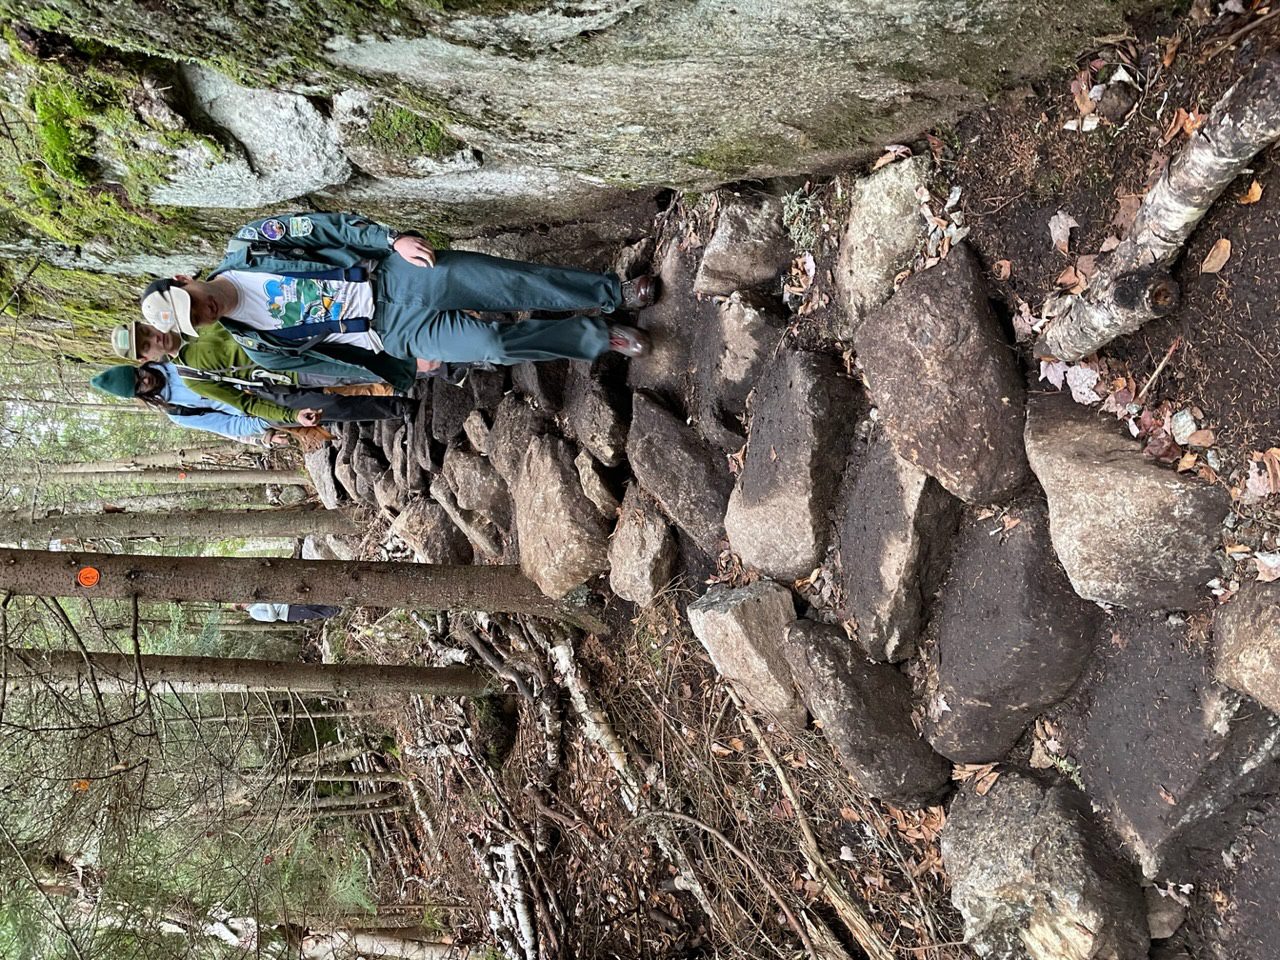 Trail crews inspect their work on a “legendary” rock staircase. Photo by Tim Rowland